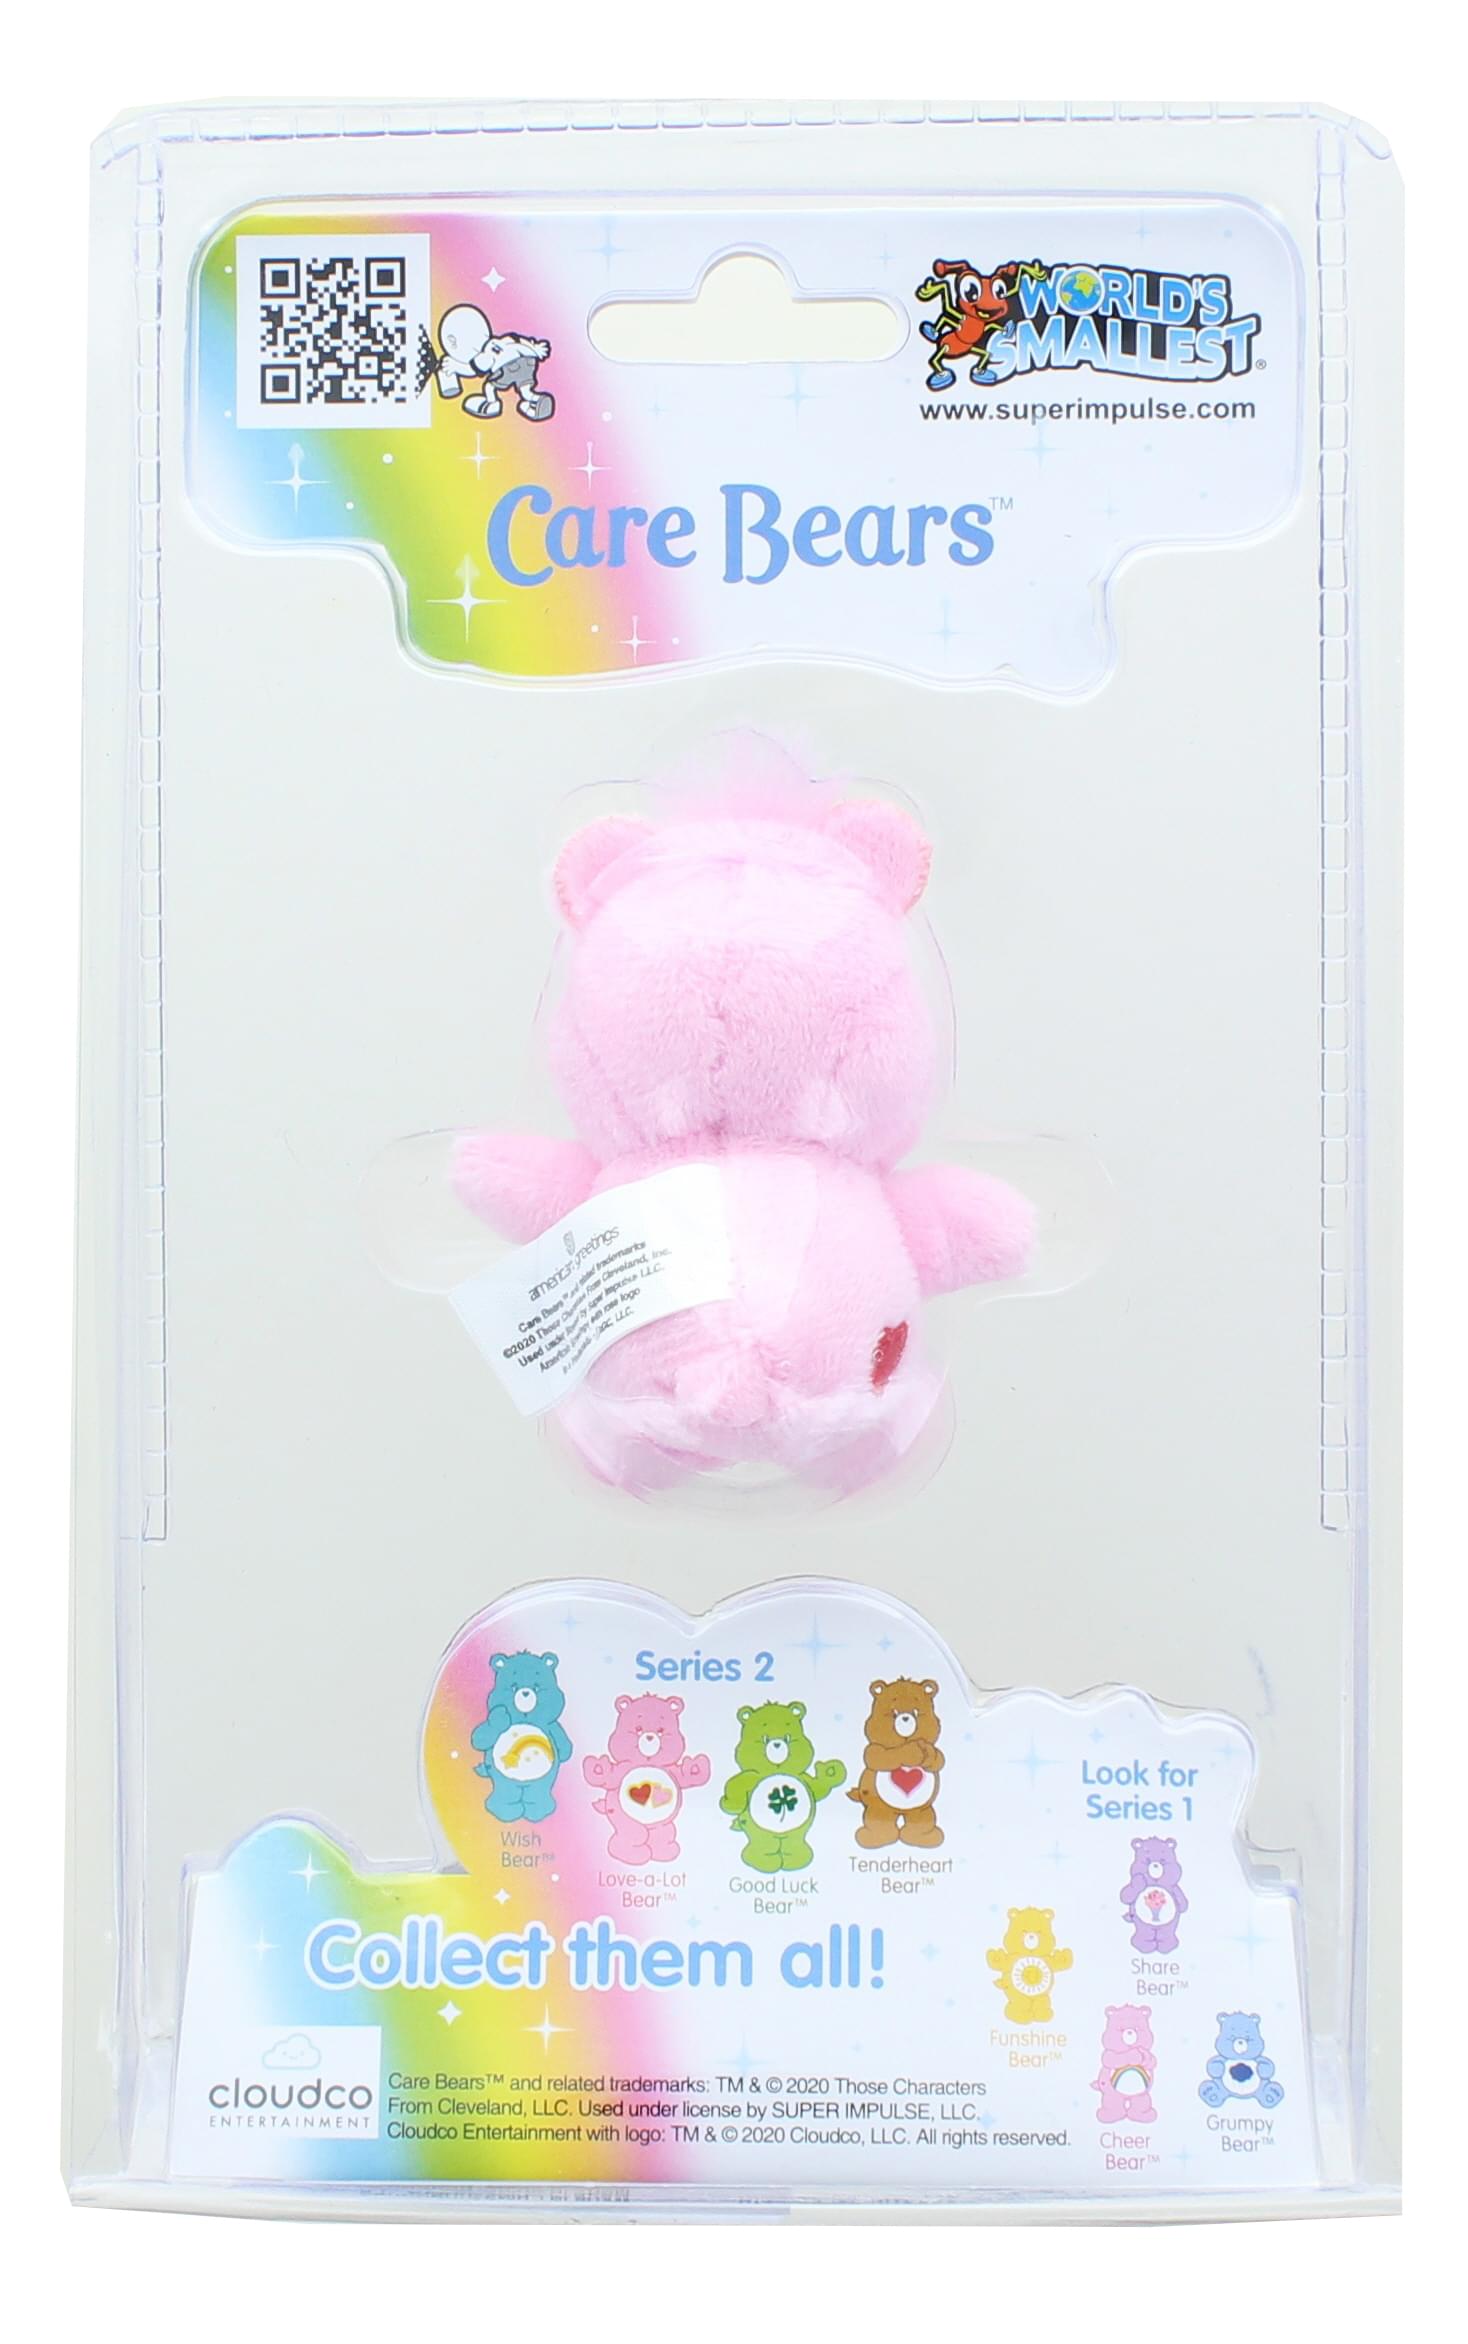 WORLDS SMALLEST CARE BEAR - THE TOY STORE